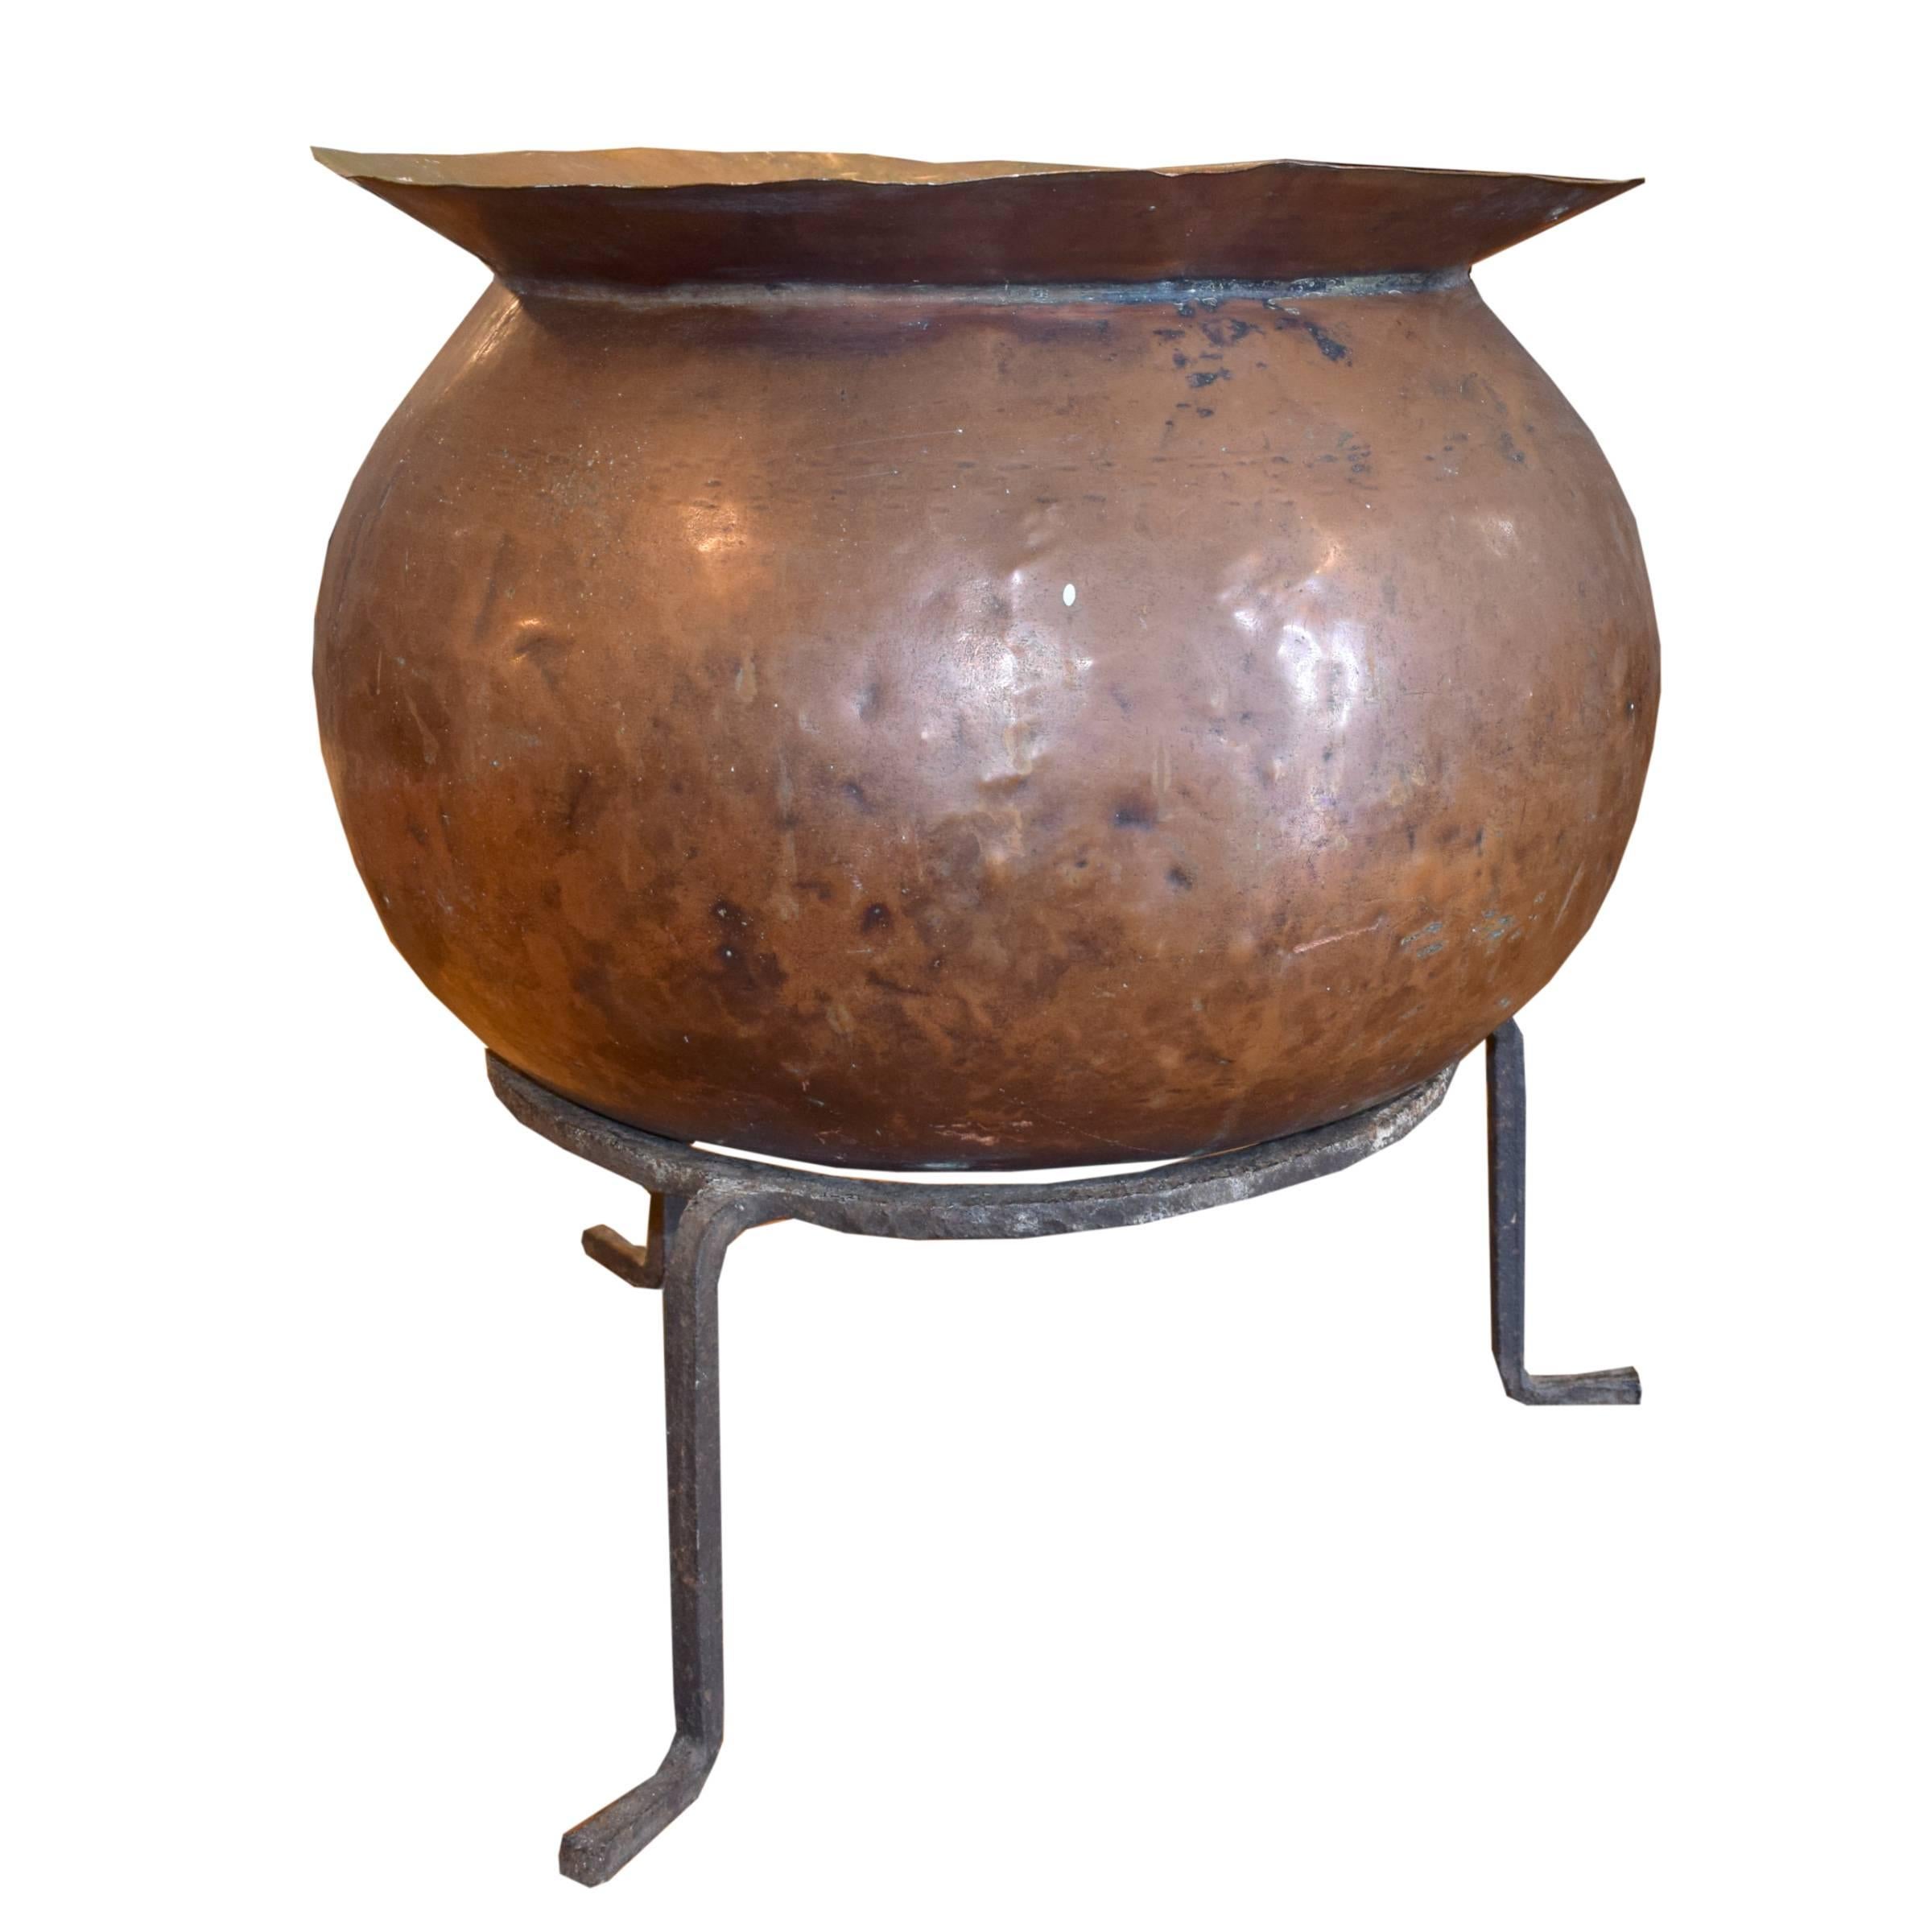 A French copper cooking vessel with a hammered body and a wide lip, on a metal stand, circa 1900.
 